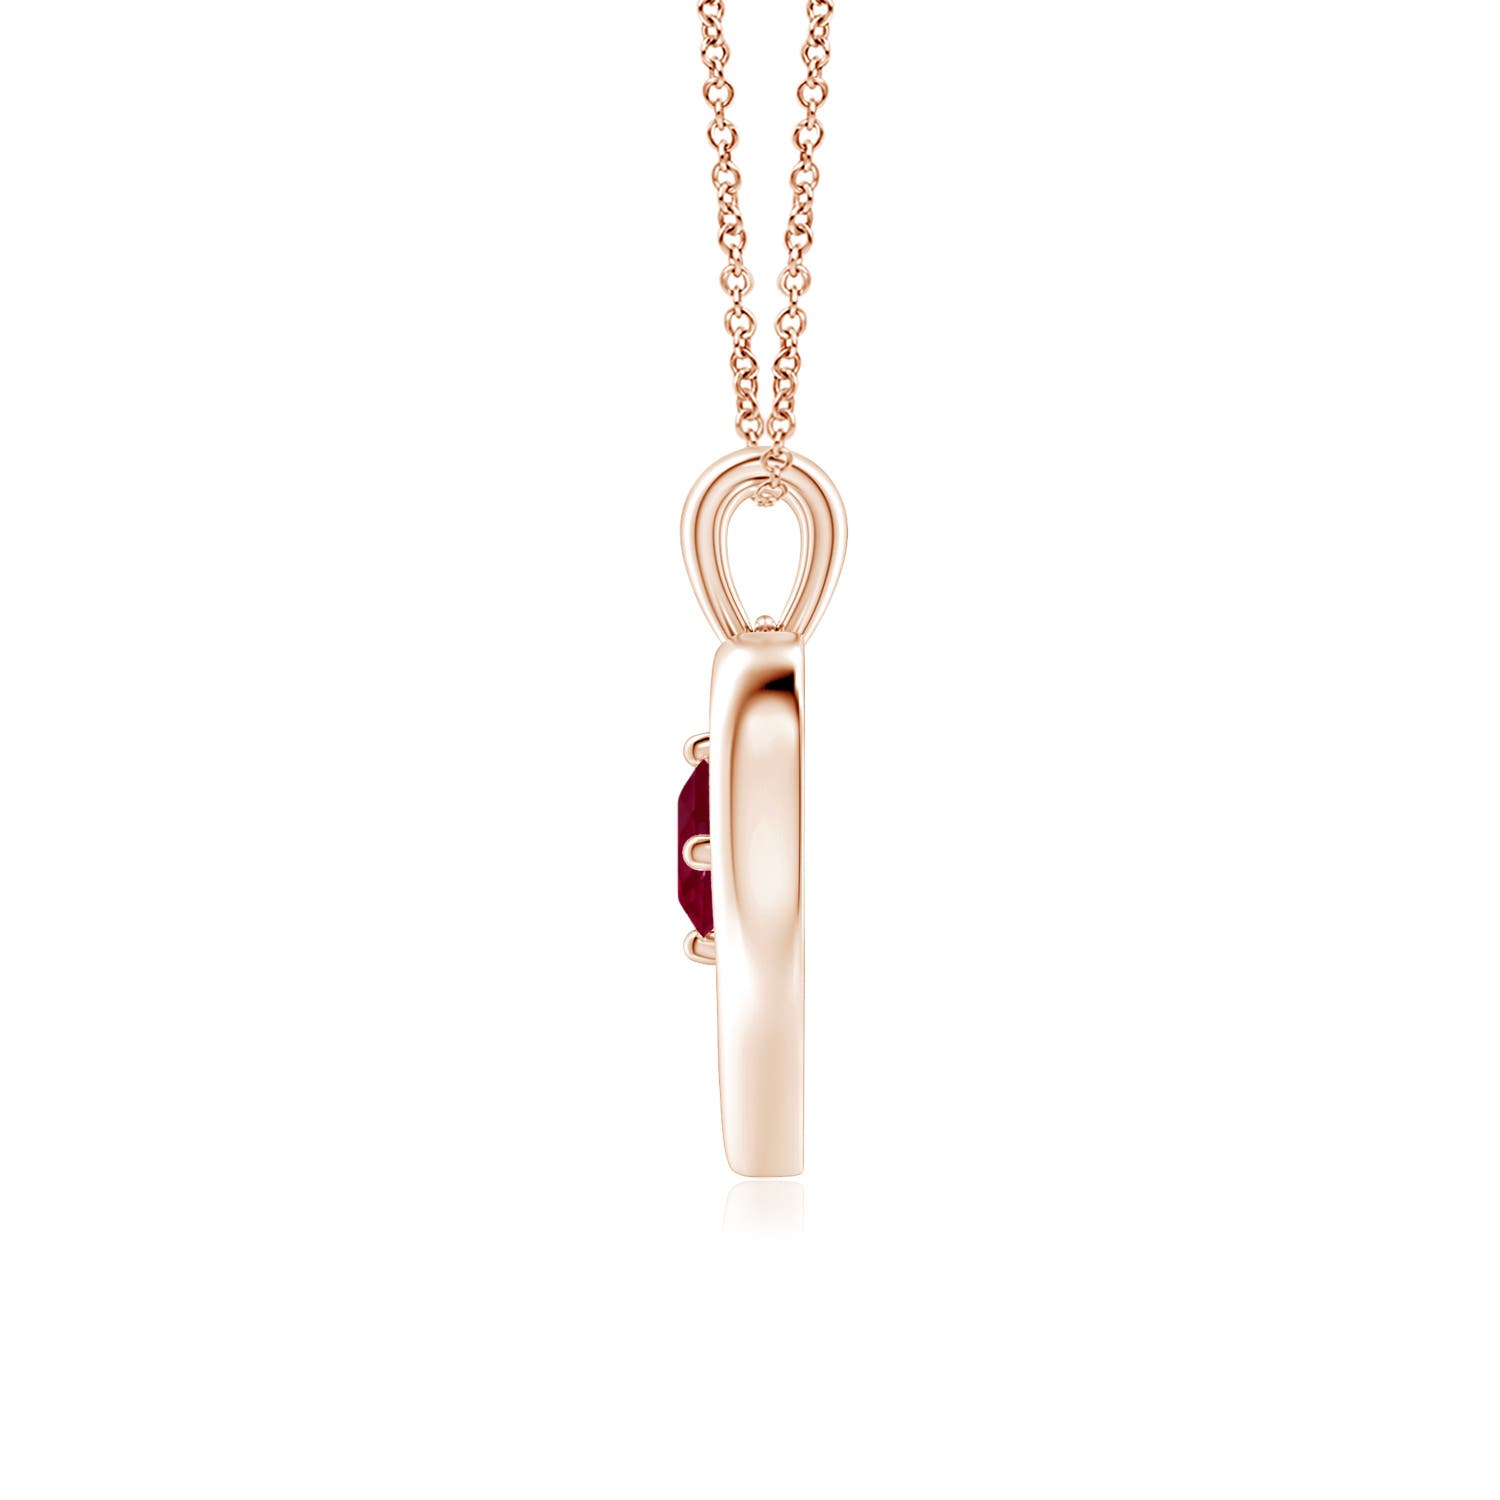 A - Ruby / 0.34 CT / 14 KT Rose Gold